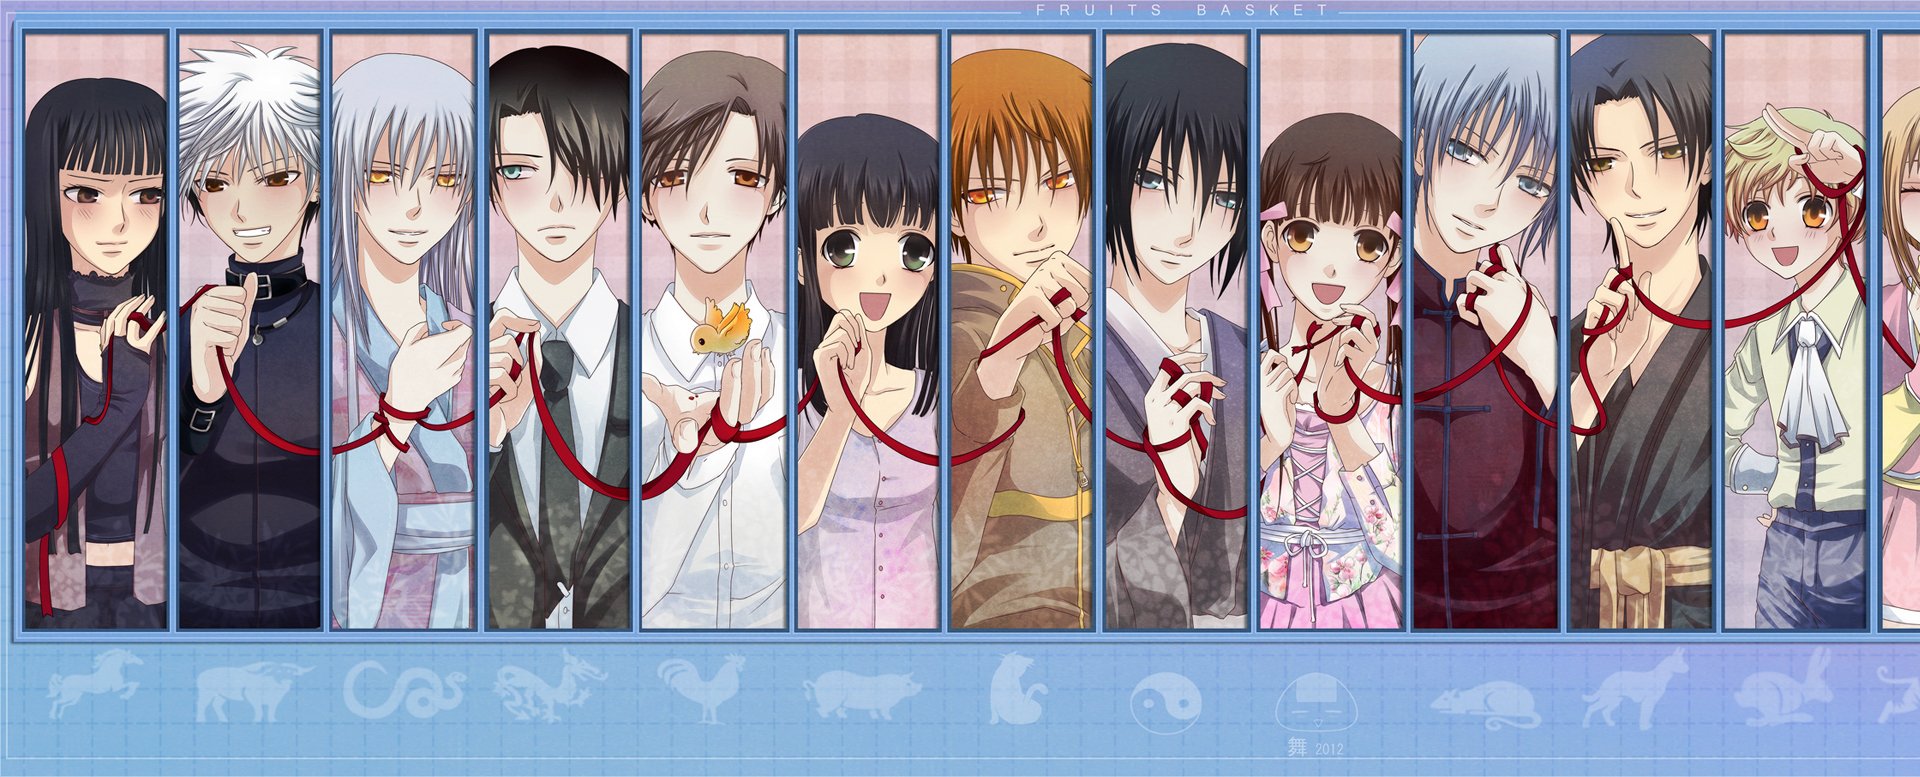 Complete Fruits Basket Watch Order (OFFICIAL)